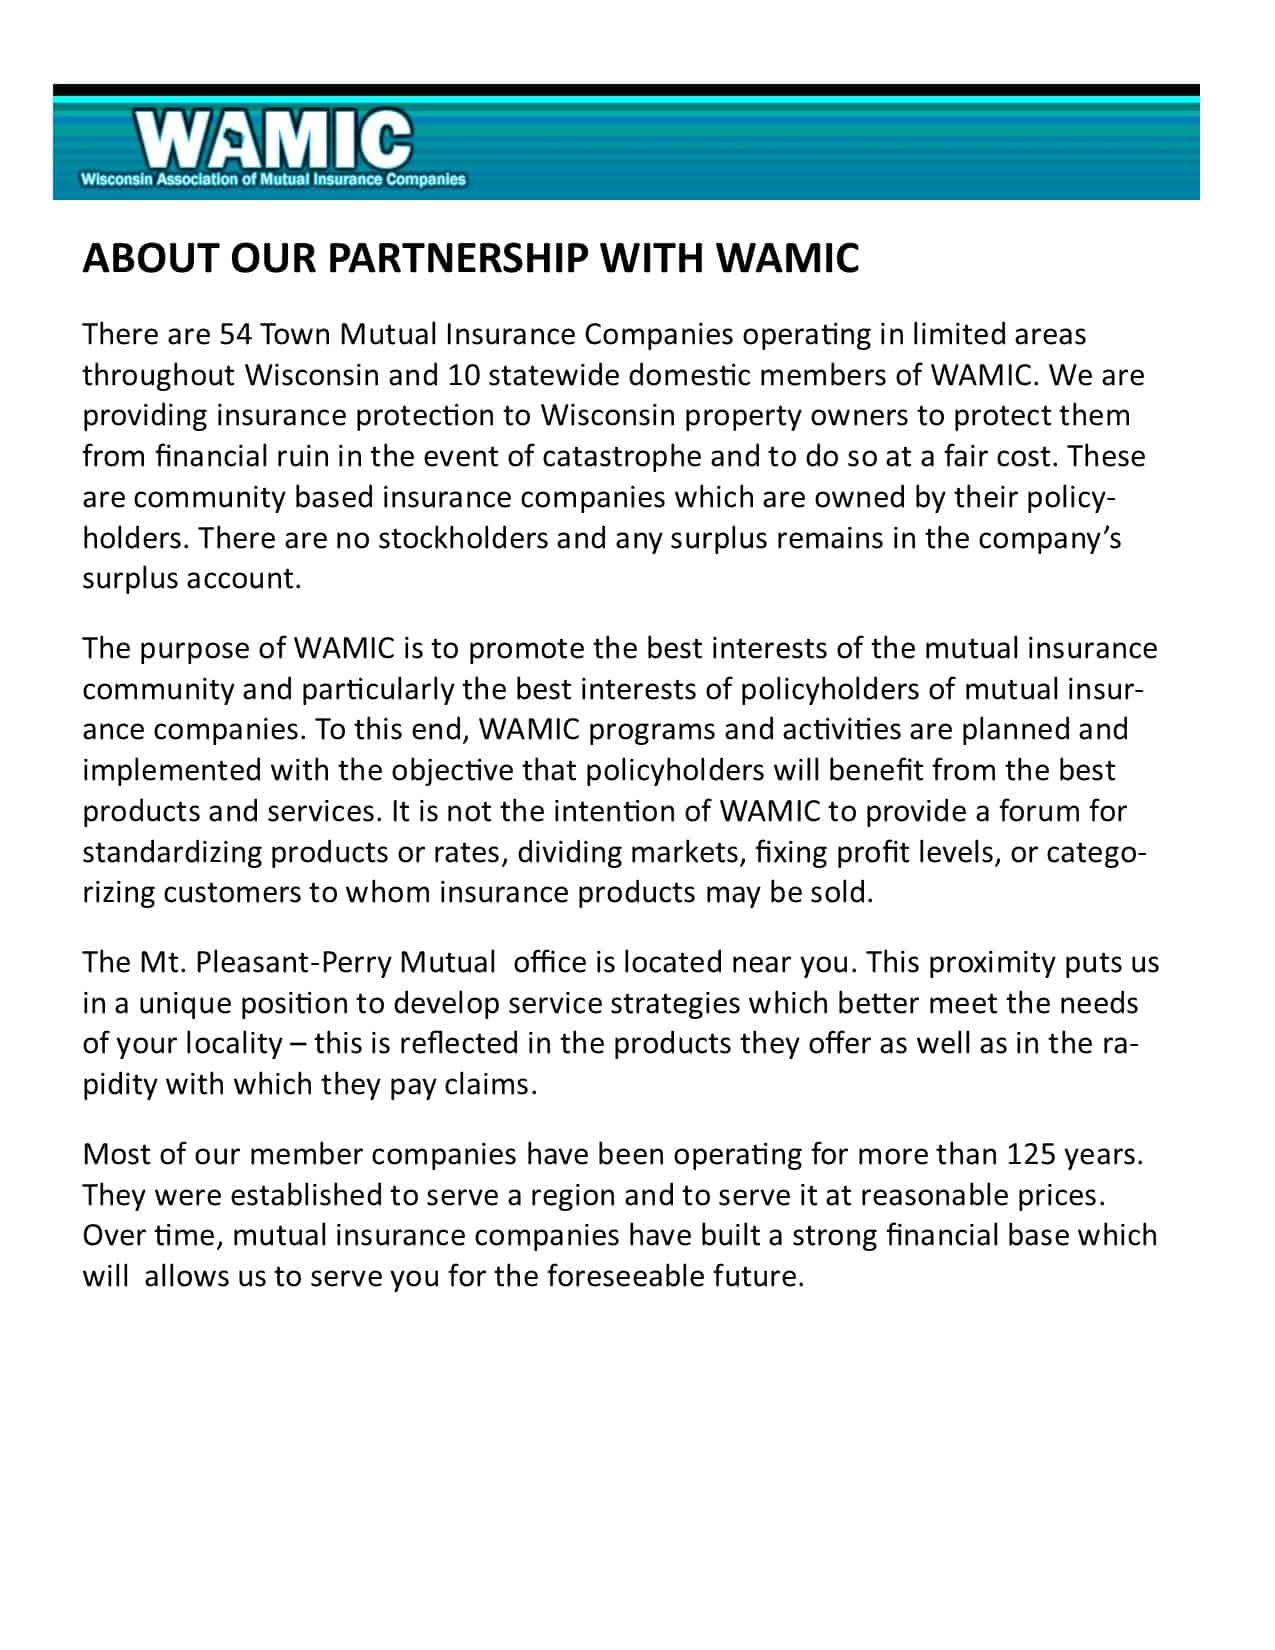 Our Partnership with WAMIC